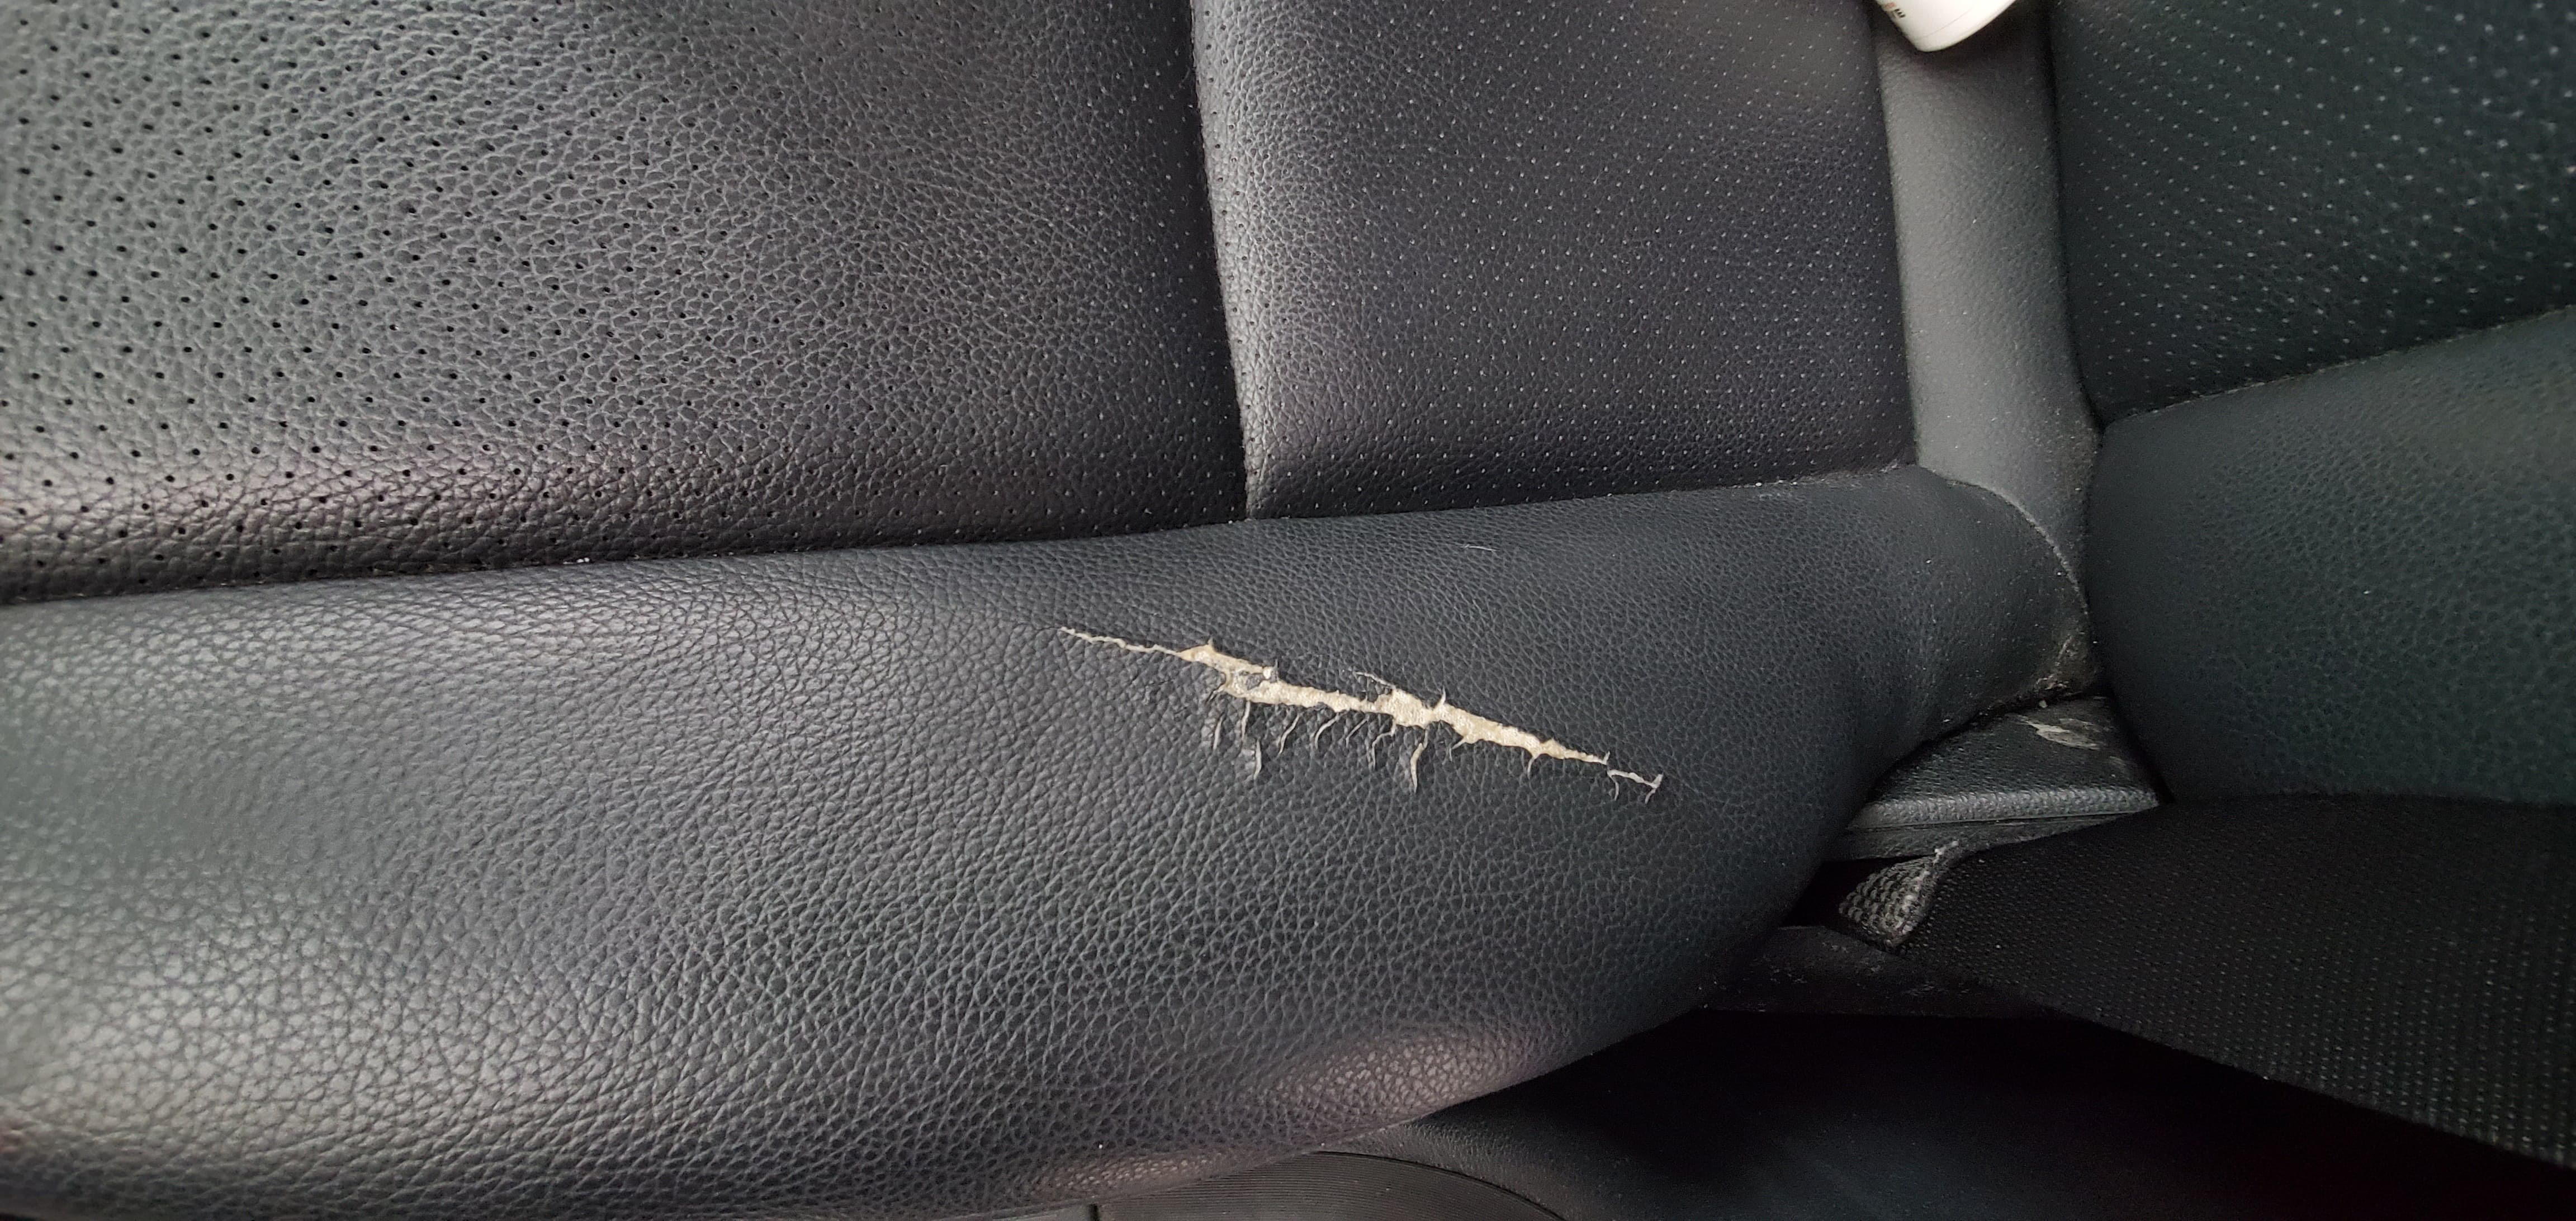 How To Repair A Leather Car Seat - How To Mend Torn Leather Car Seat